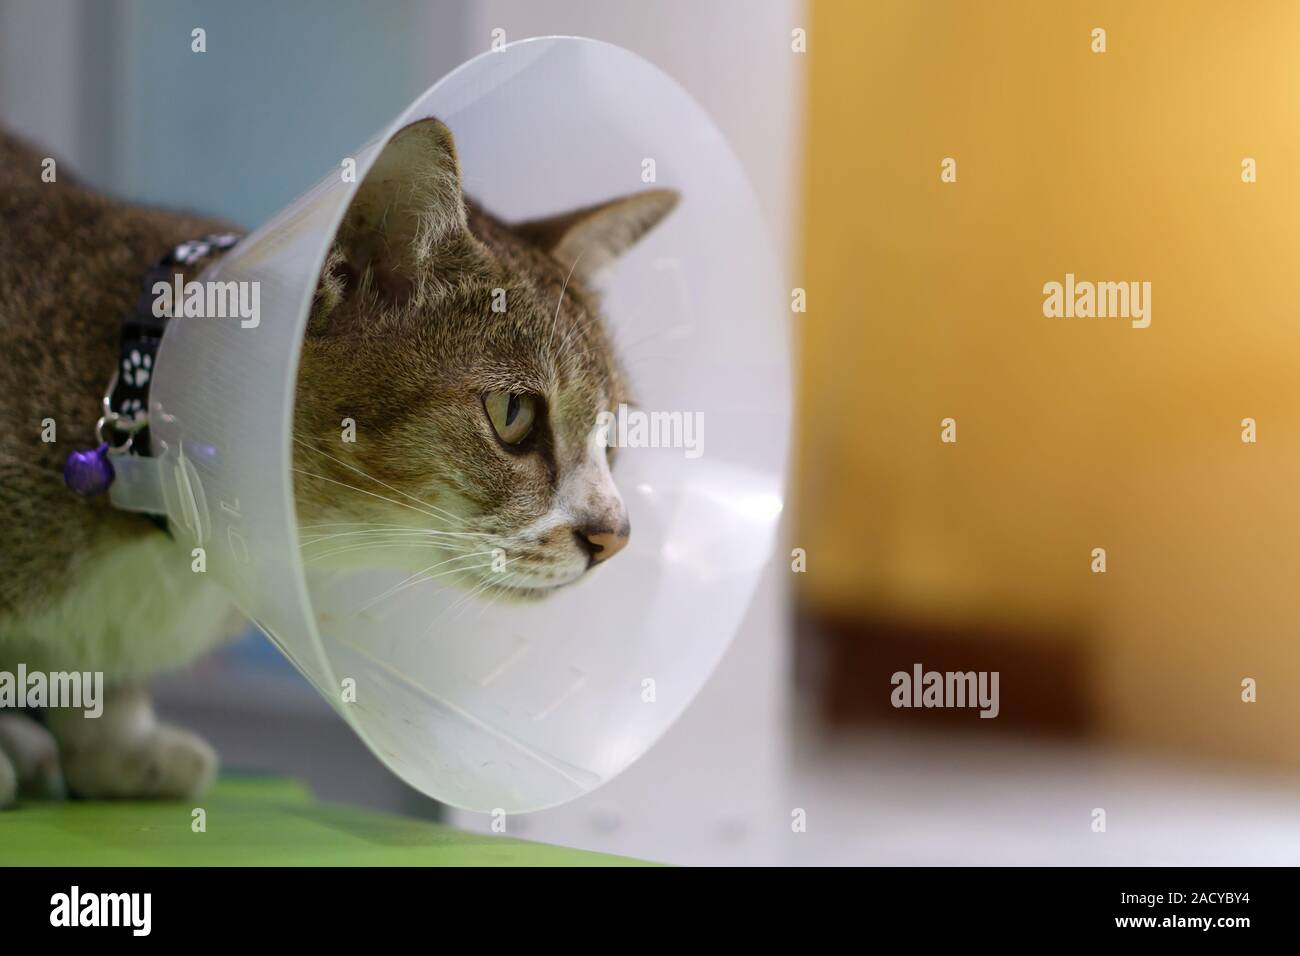 Sick cat with veterinary cone or plastic cone collar on its head to protect cat from licking a wound. Stock Photo